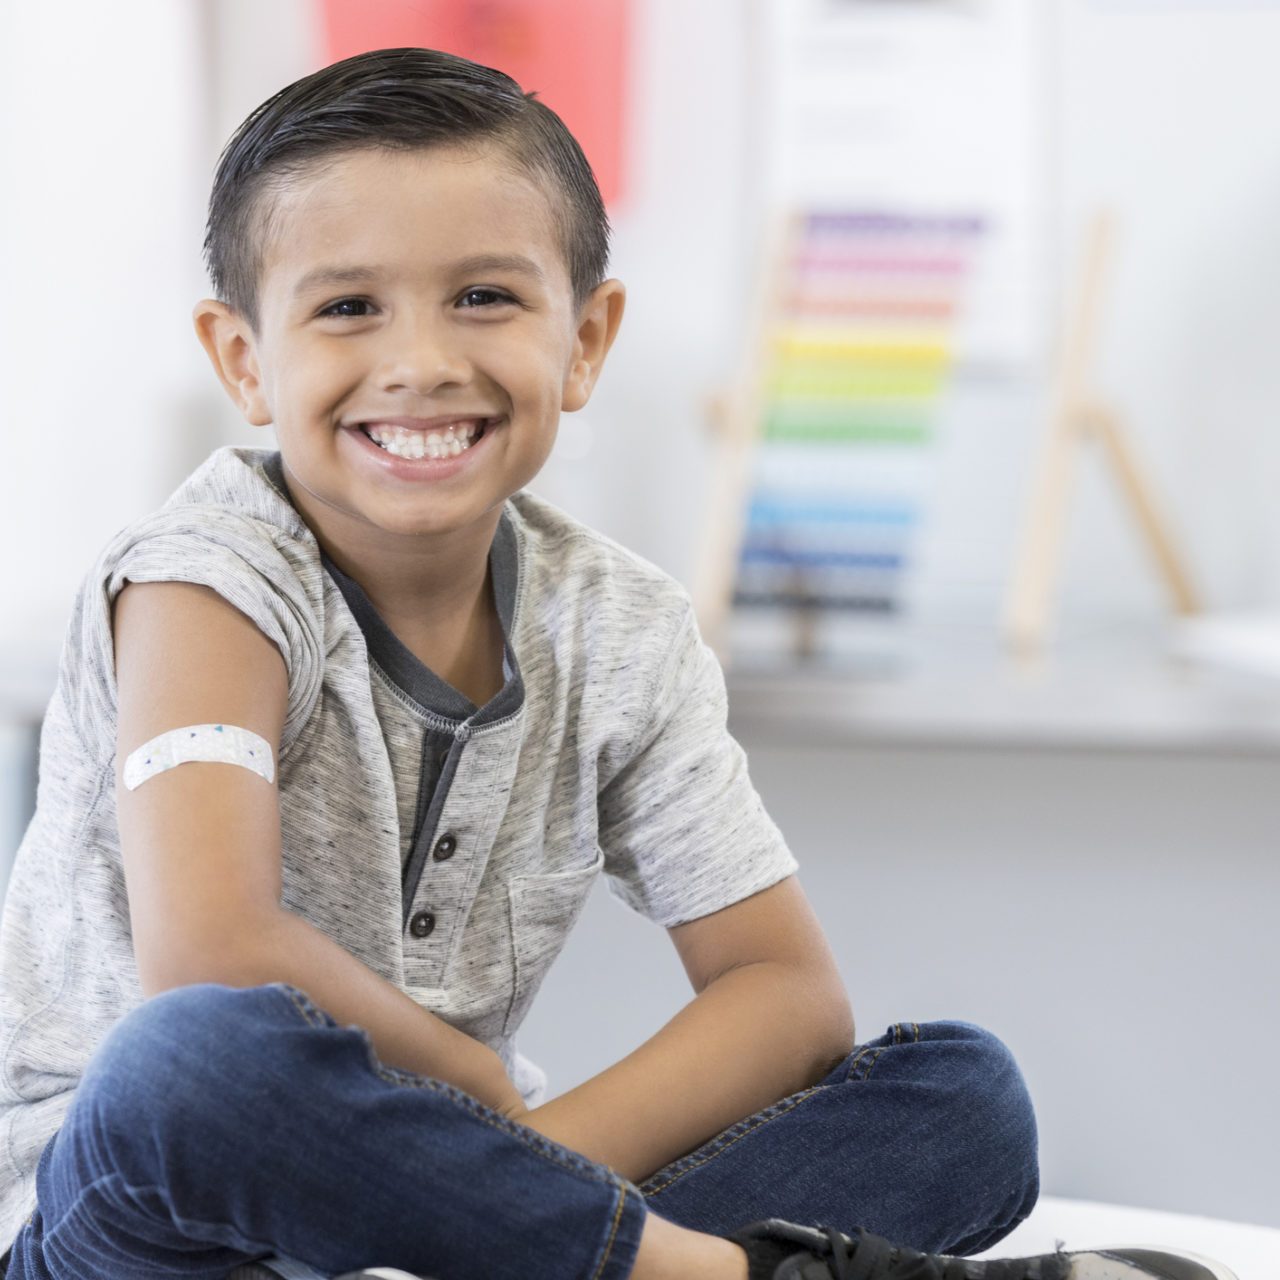 An adorable little elementary age boy sits cross legged on an exam table in his pediatrician's office.  He displays an arm bandage as he smiles for the camera.